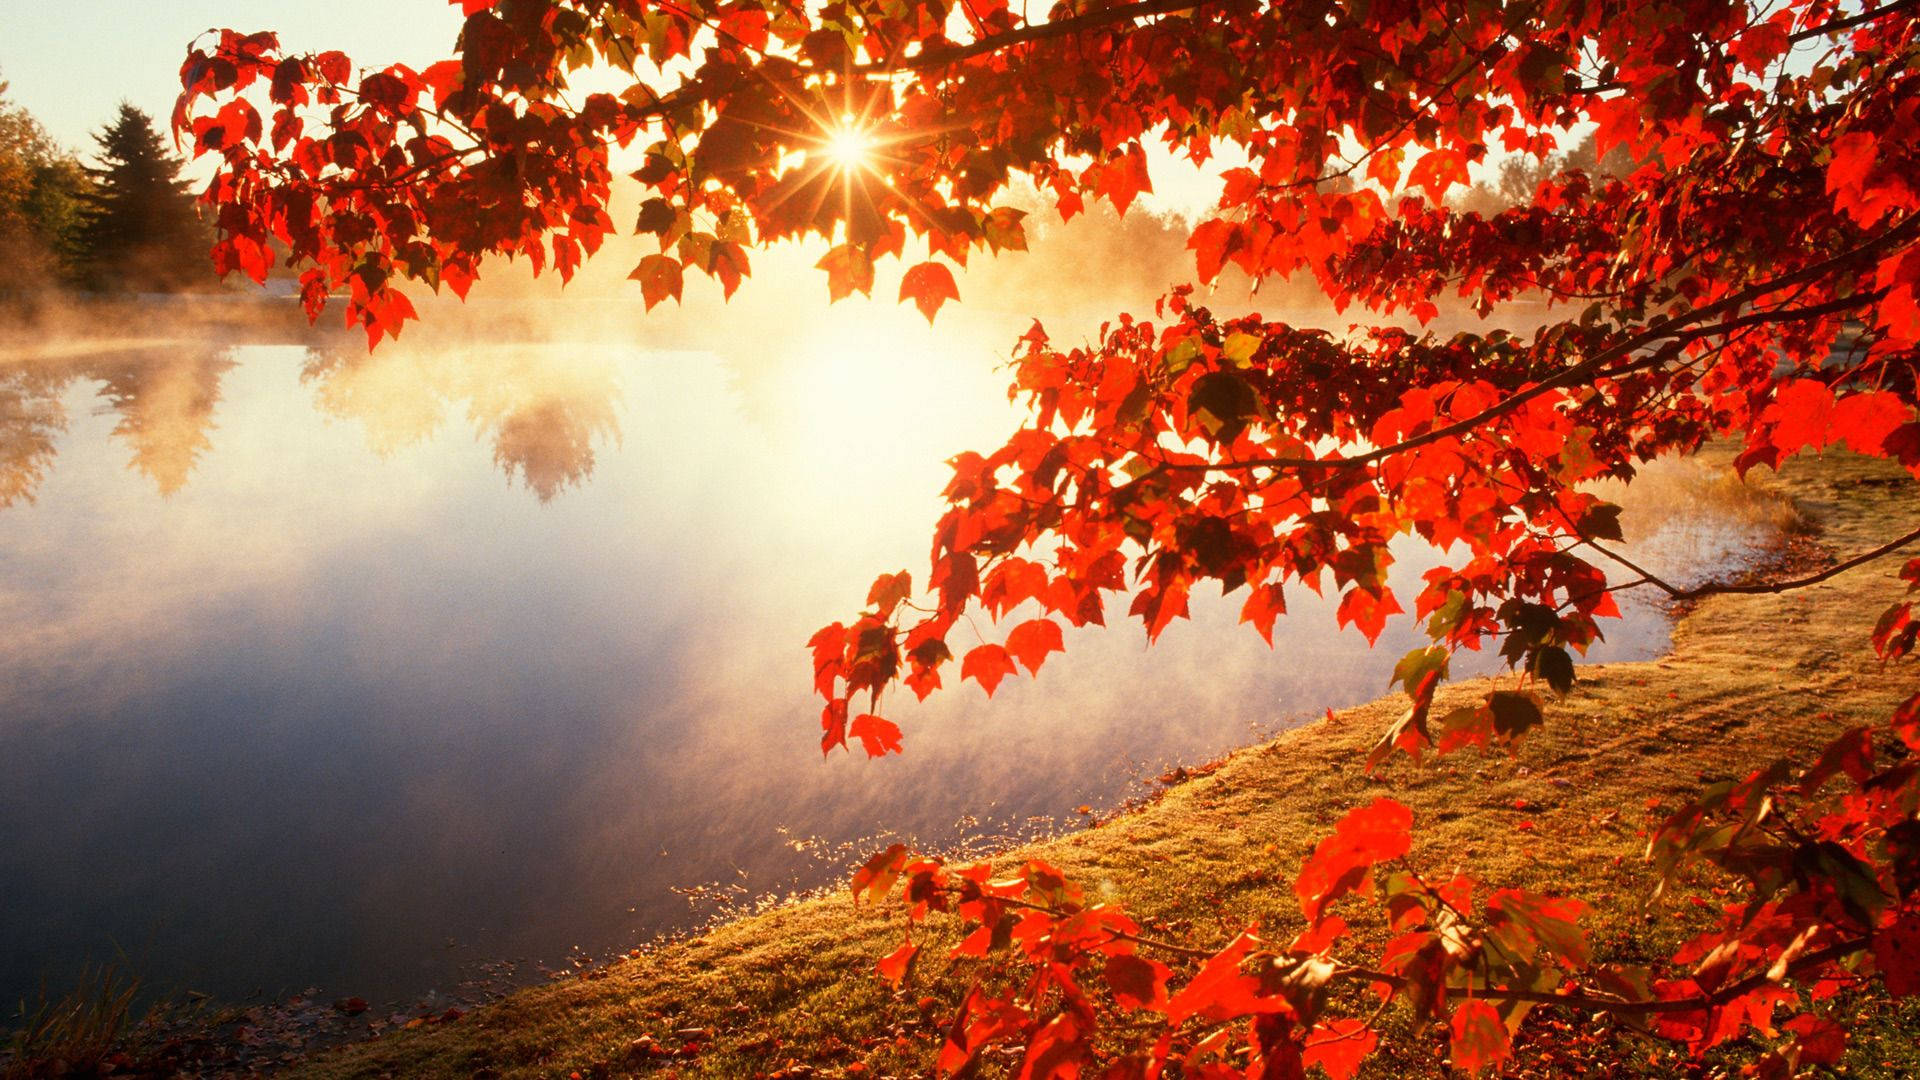 Autumn Landscape With Red Maple Leaves Wallpaper